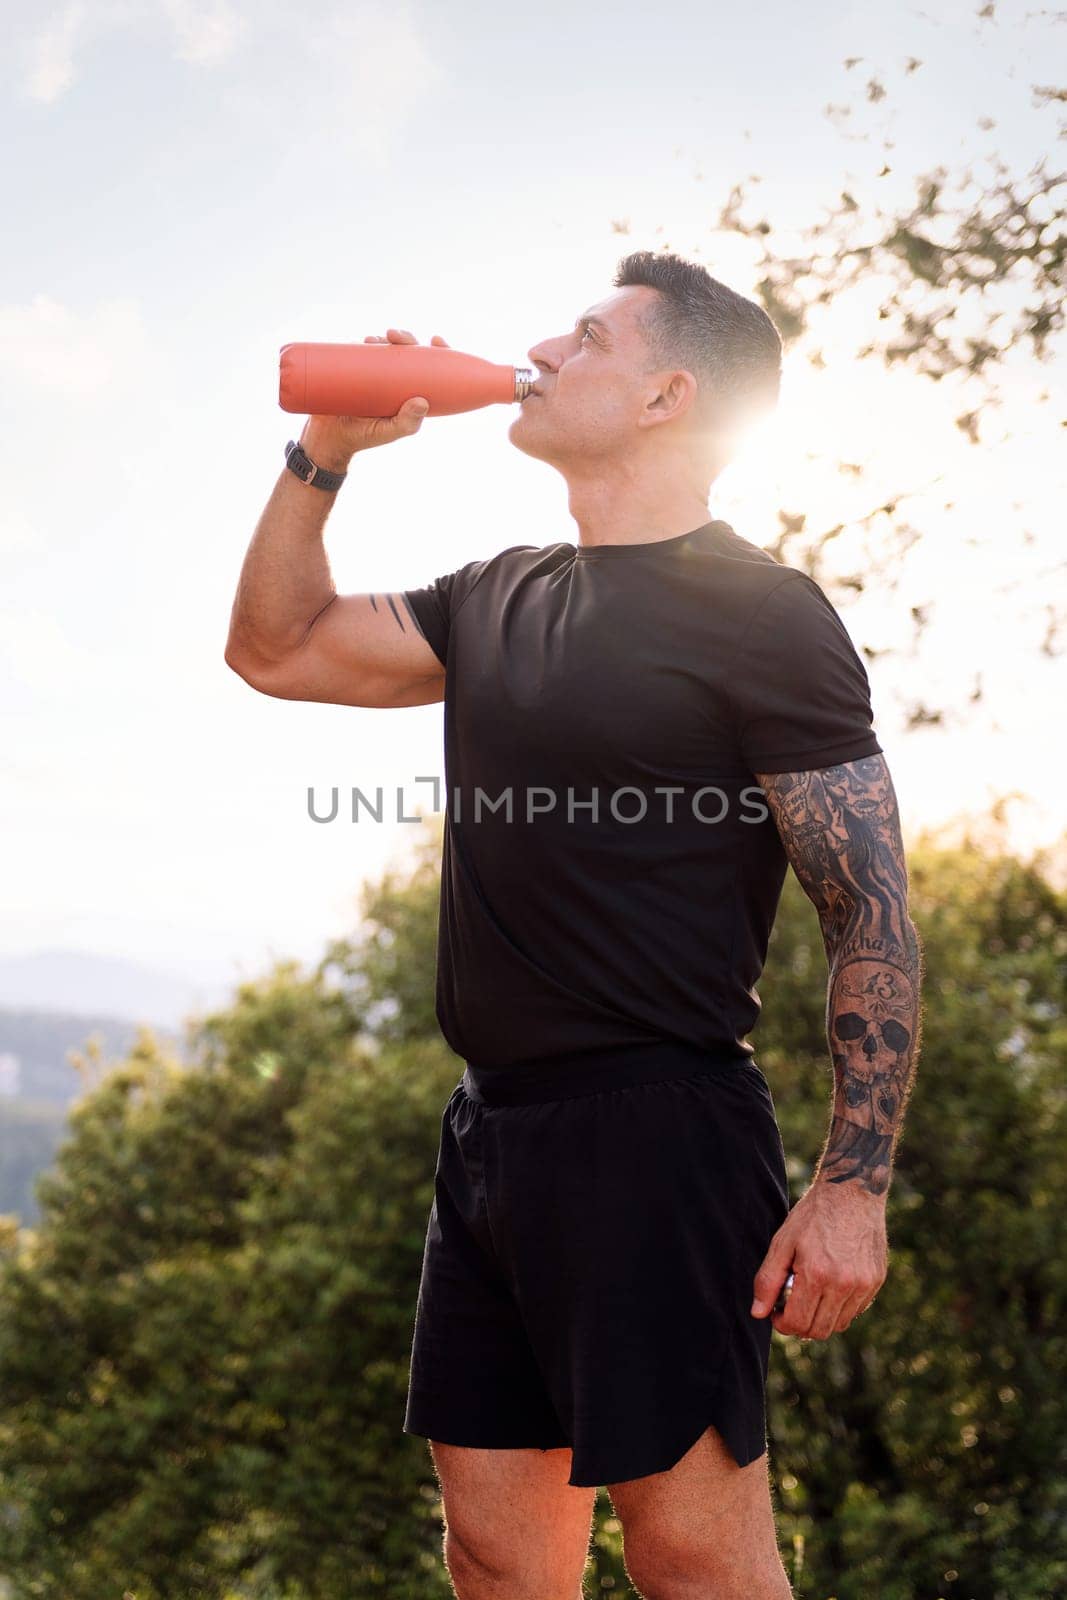 man drinking water during her training, concept of sport in nature and healthy lifestyle